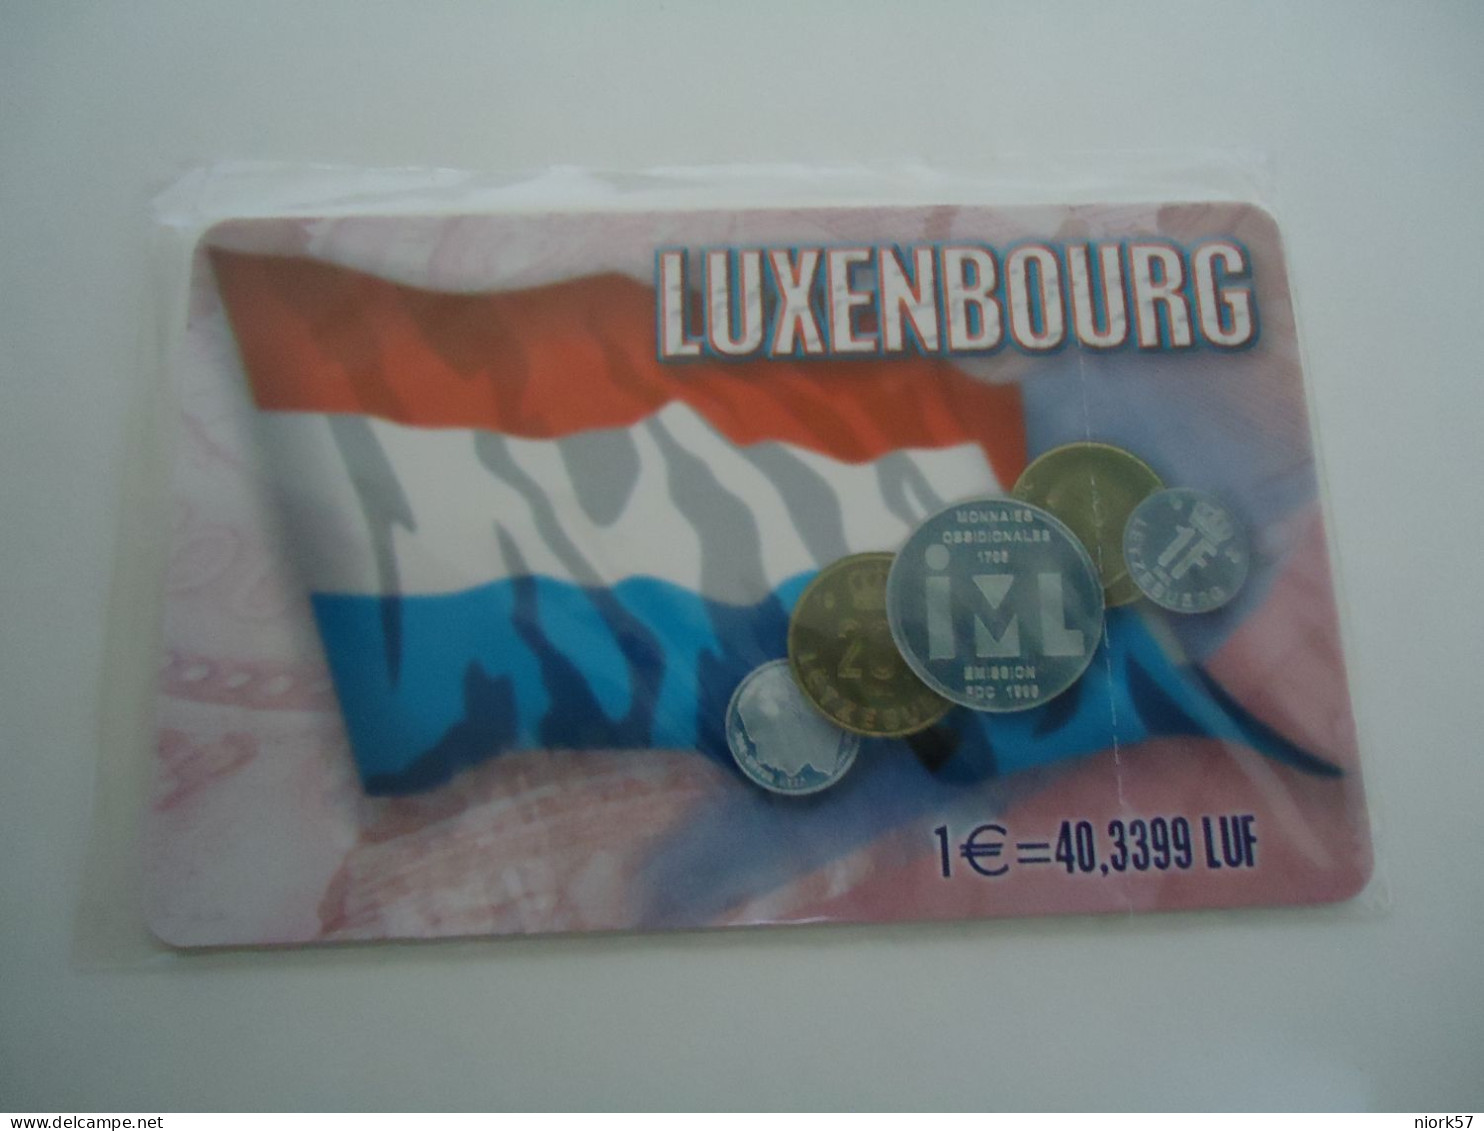 LUXEMBOURG MINT GREECE PHONECARDS  COINS ANS FLAGS  2 SCAN - Luxemburgo